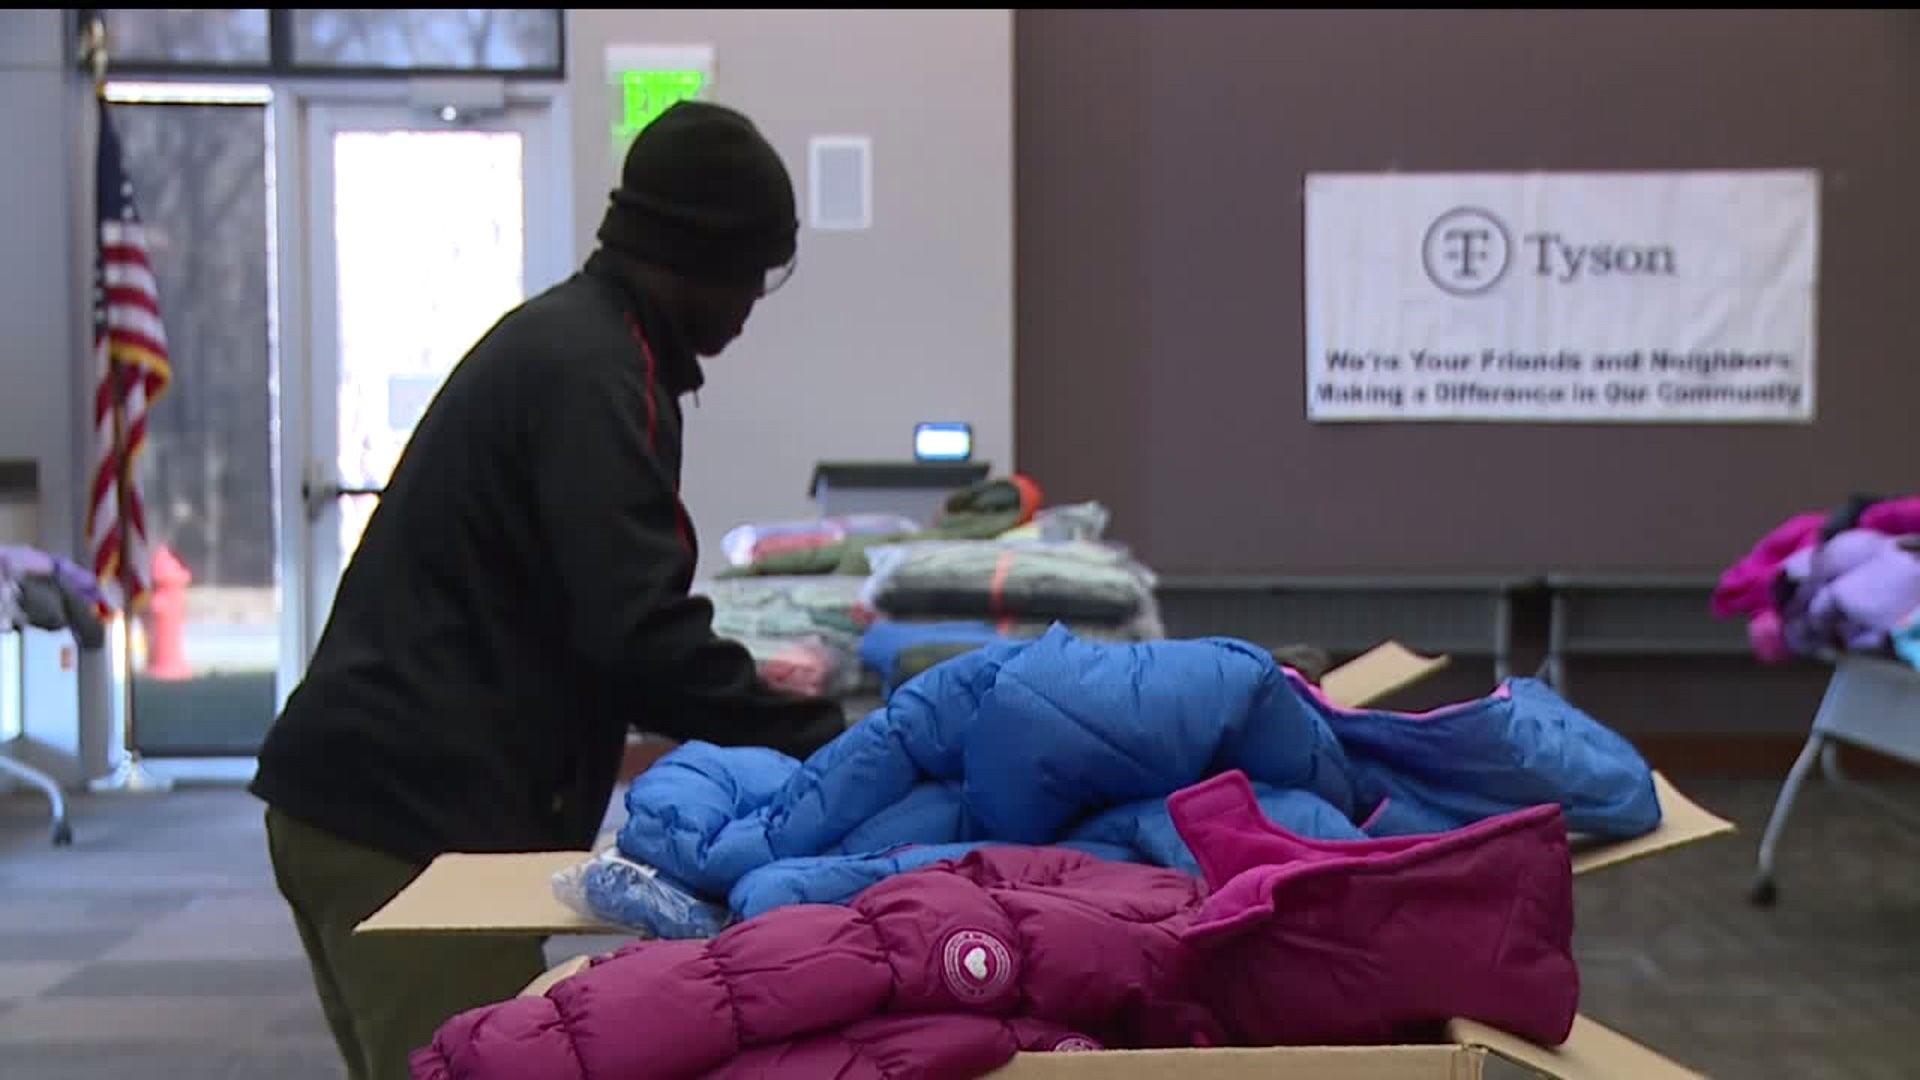 Operation Warm gives area children in need brand new coats ahead of winter